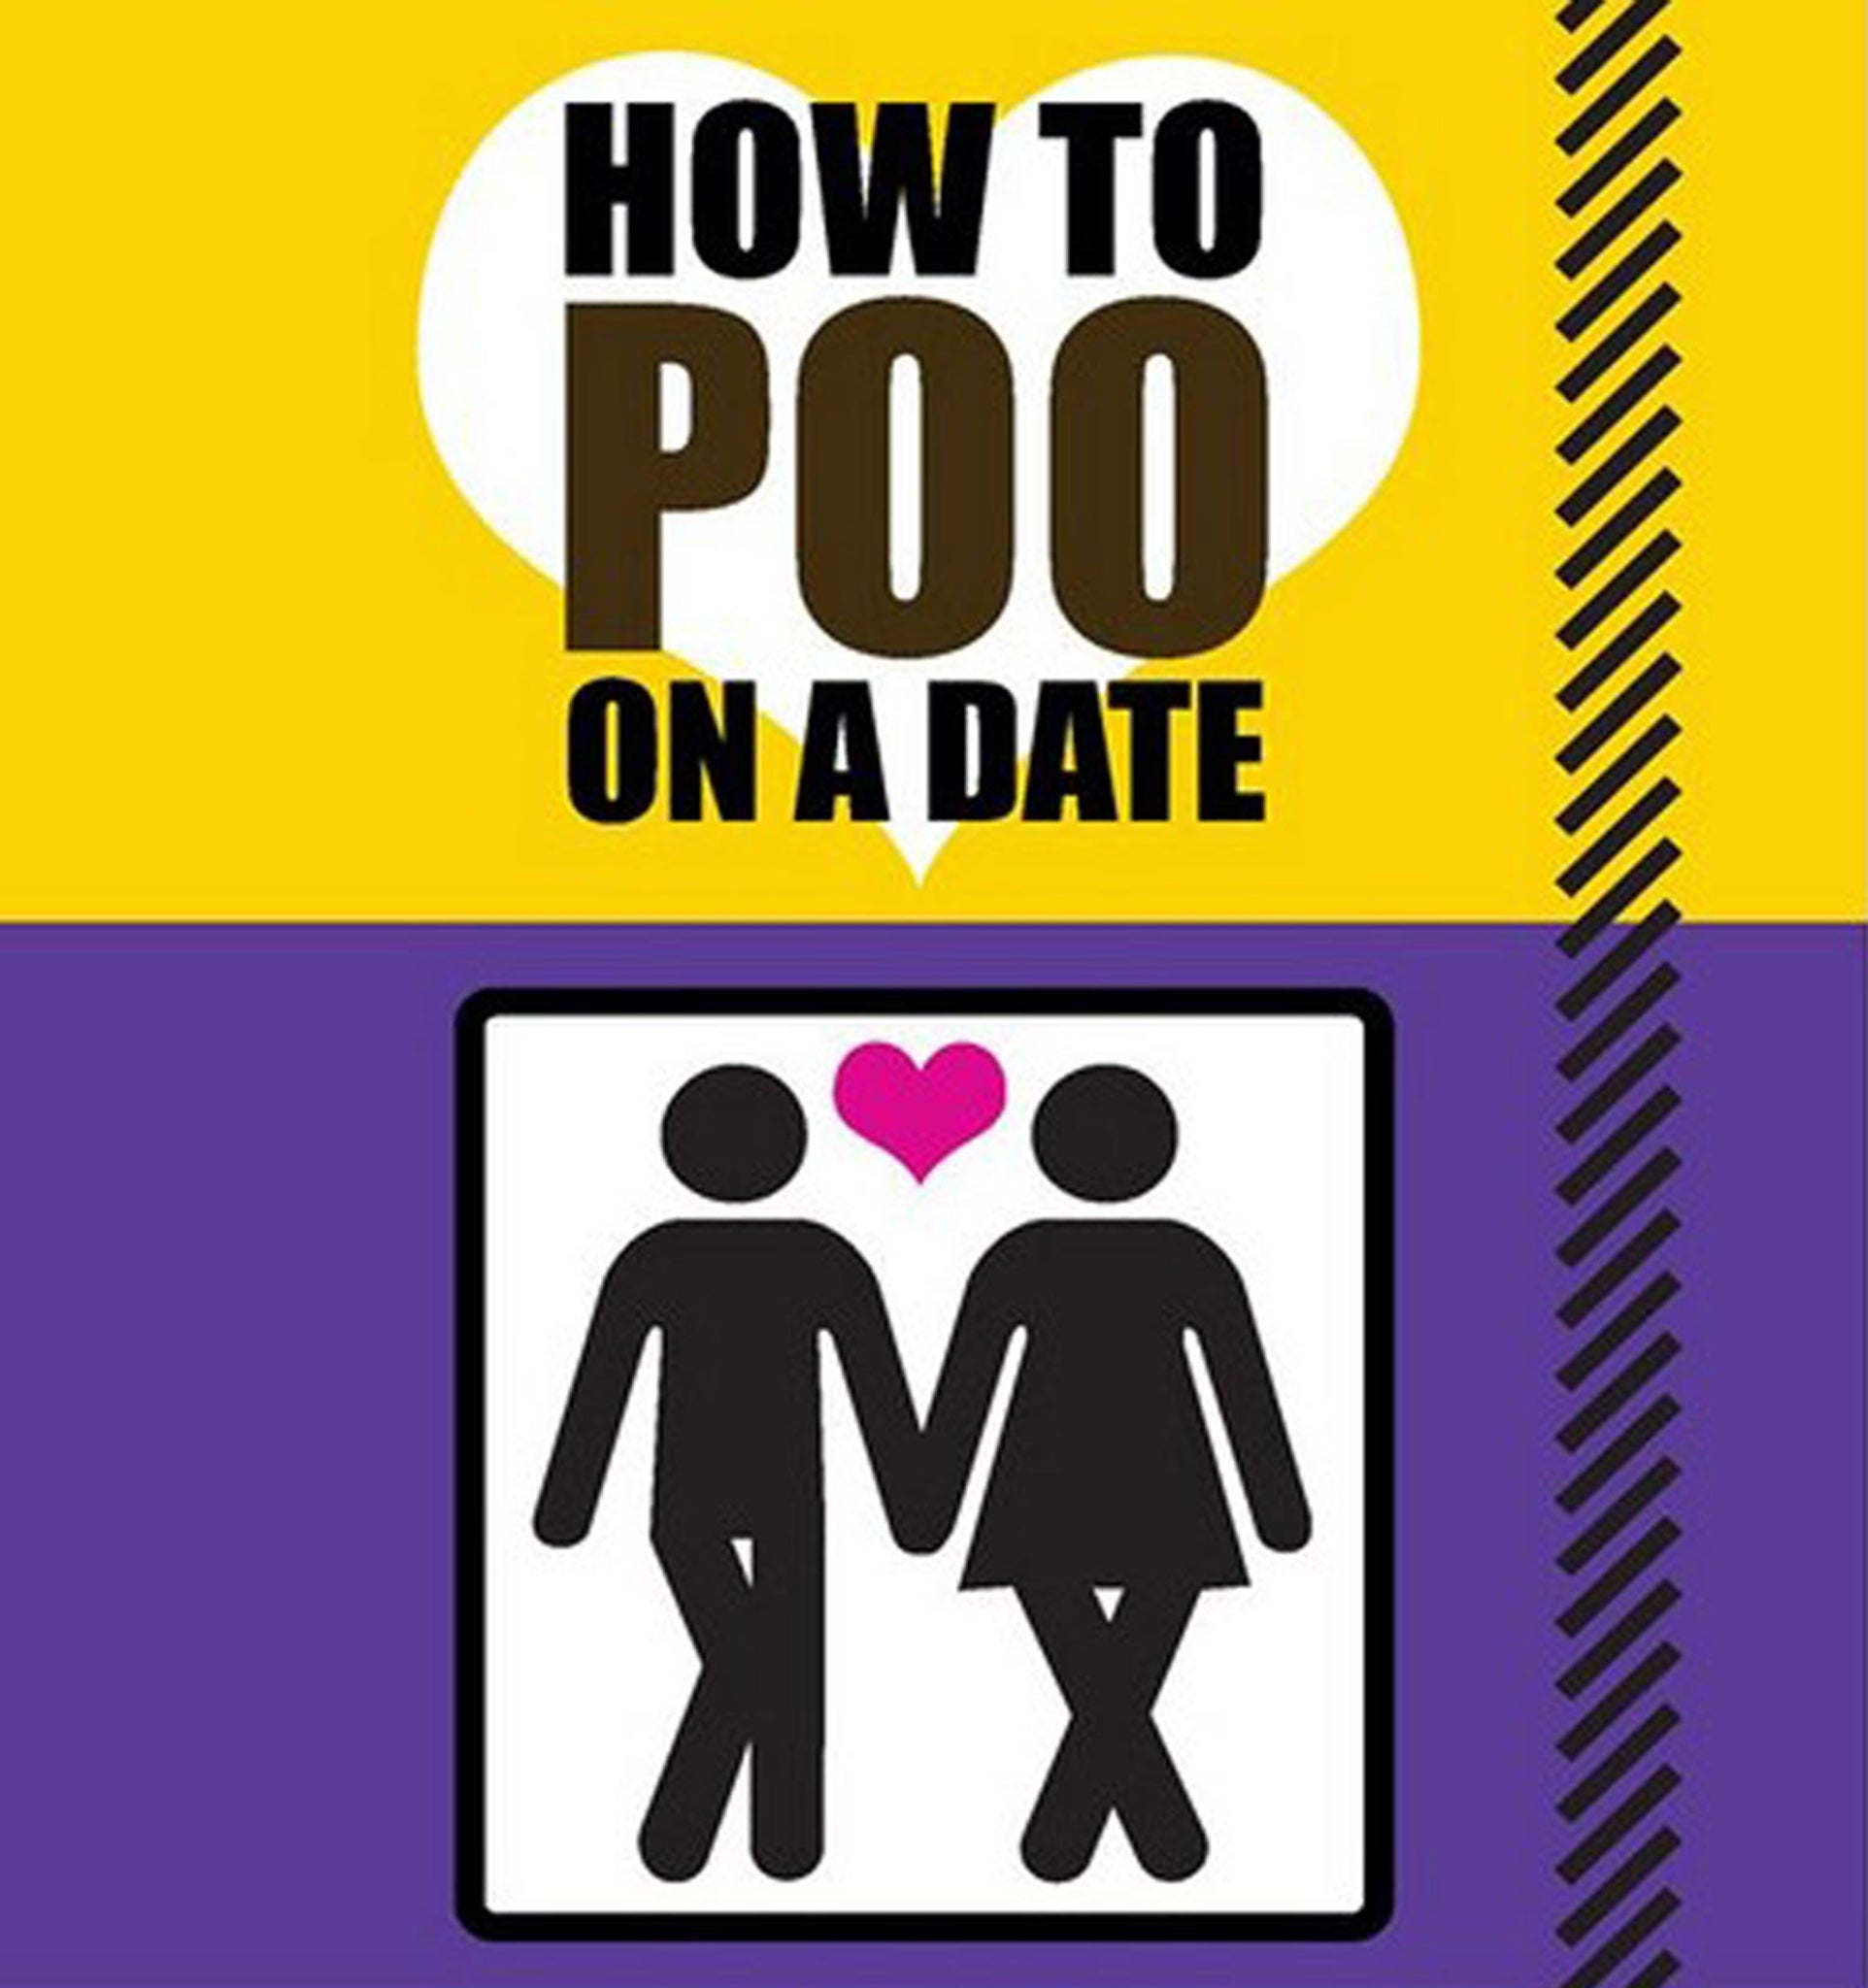 How to poo on a date, by Mats and Enzo